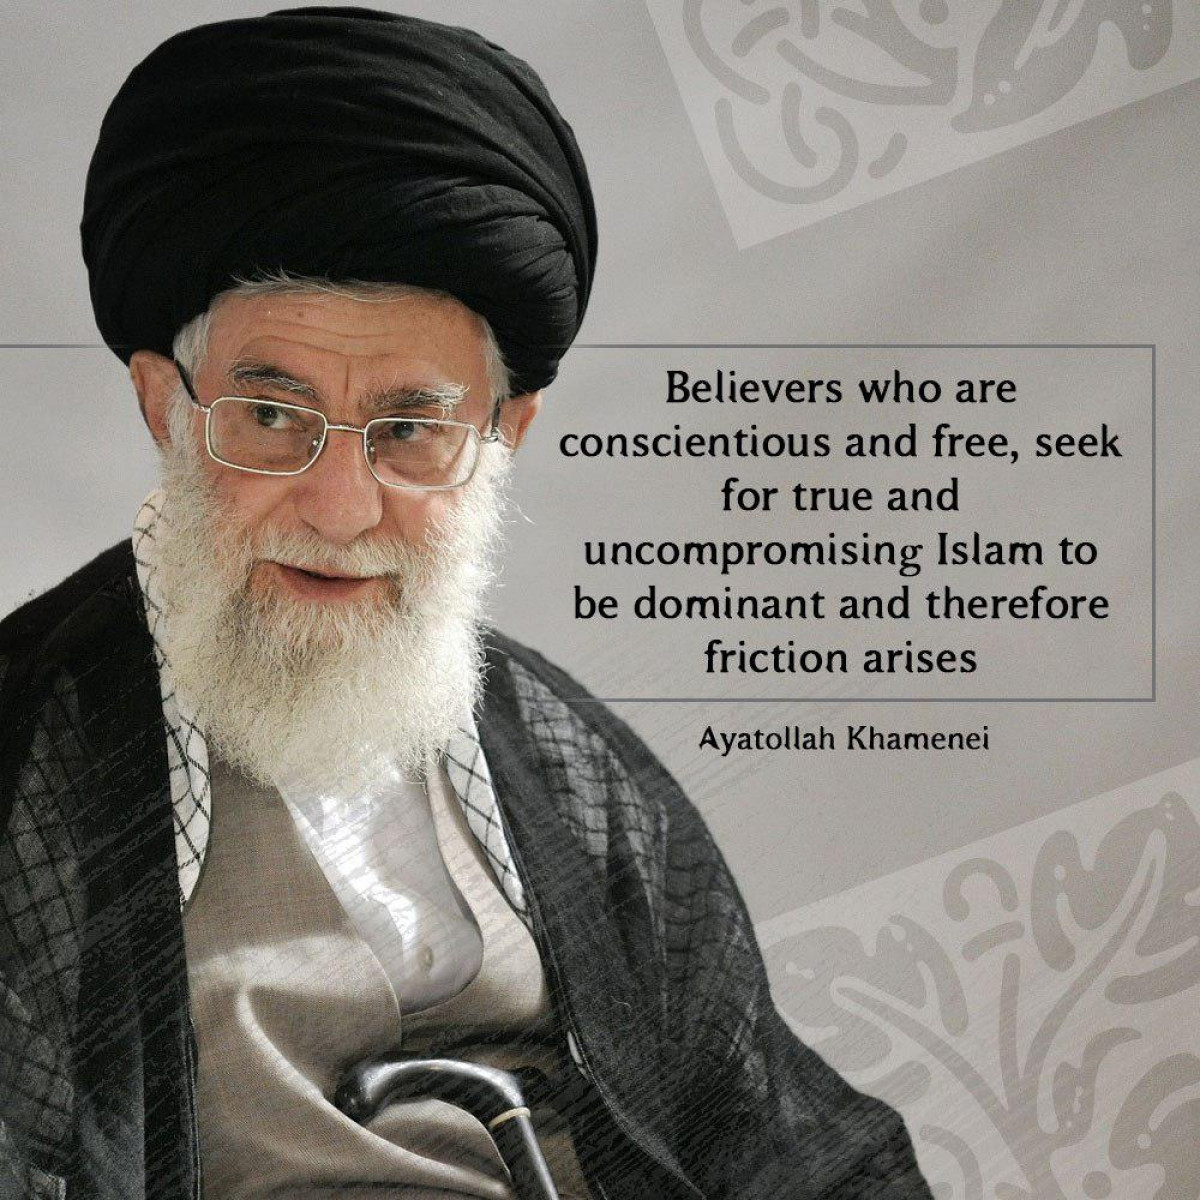 Believers who are conscientious and free